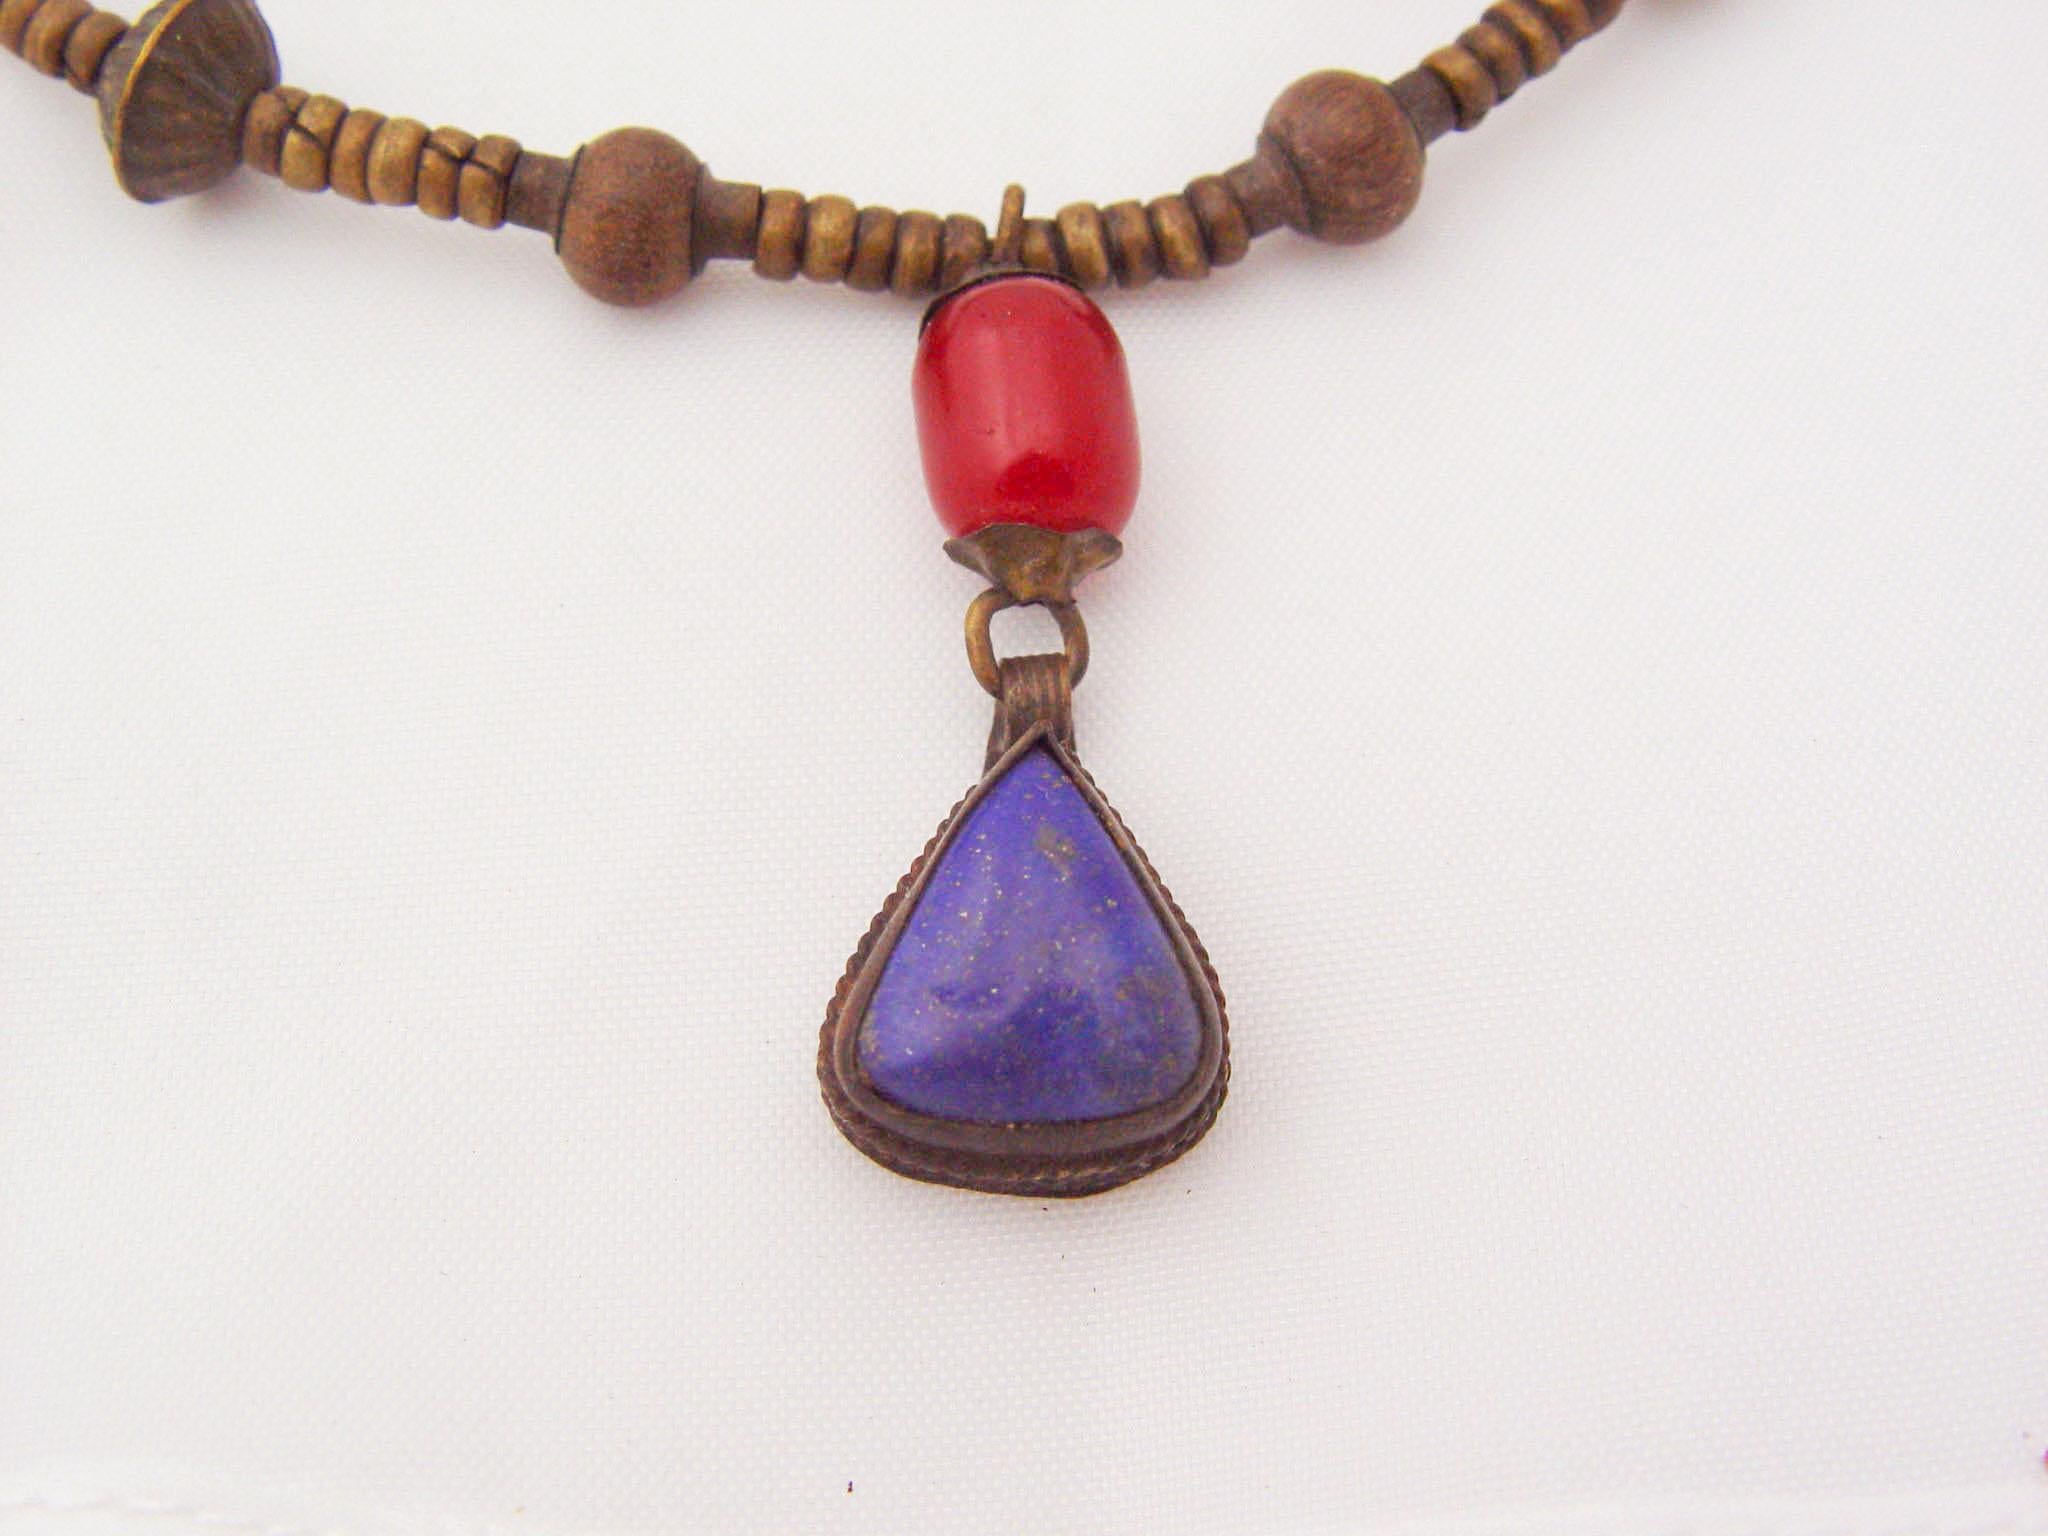 Vintage middle eastern tribal necklace. Tear drop large lapis lazuli pendent and red carnelian bead pendent and large filigree brass beads which still have traces of the original silver wash. The lapis drop is .75